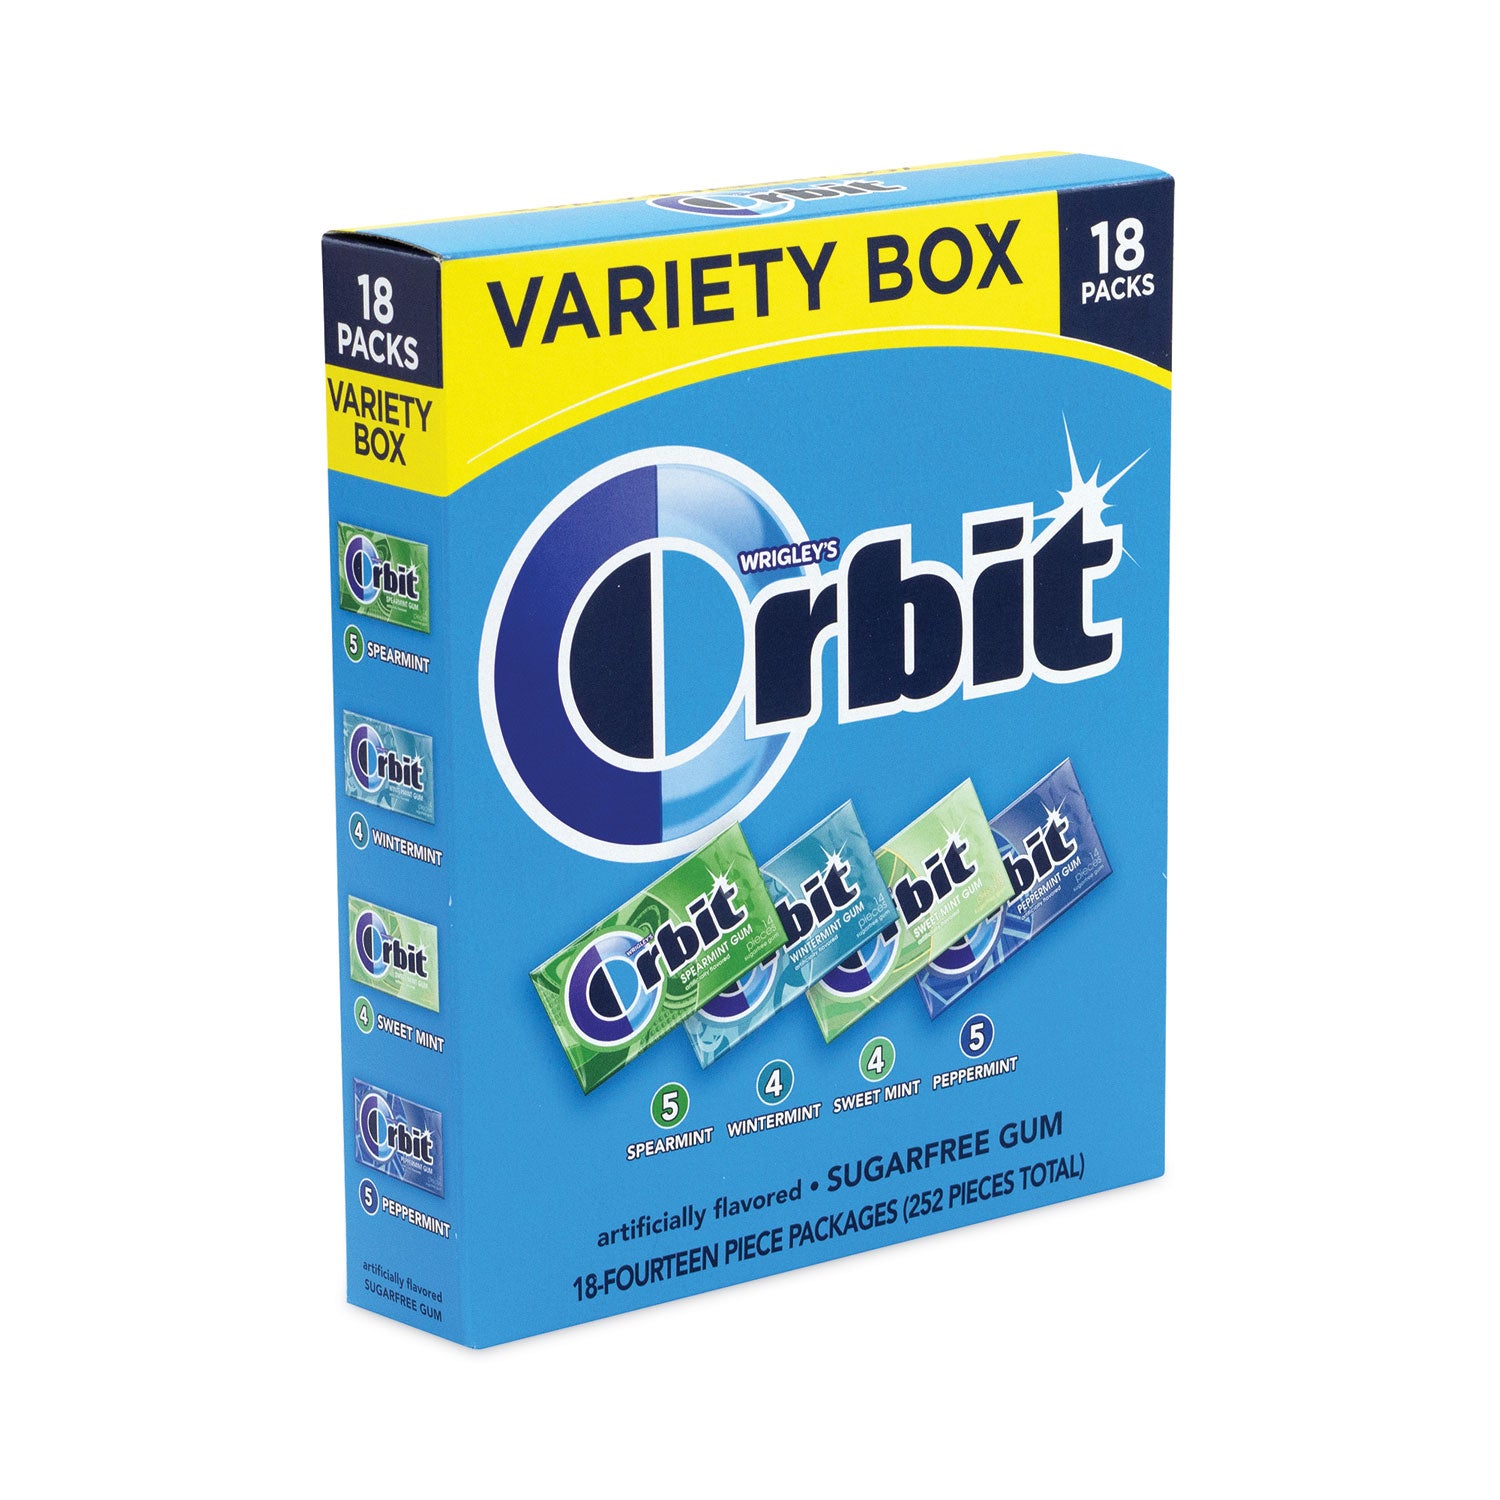 sugar-free-chewing-gum-variety-box-four-mint-flavors-14-pieces-pack-18-packs-carton-ships-in-1-3-business-days_grr22000568 - 1